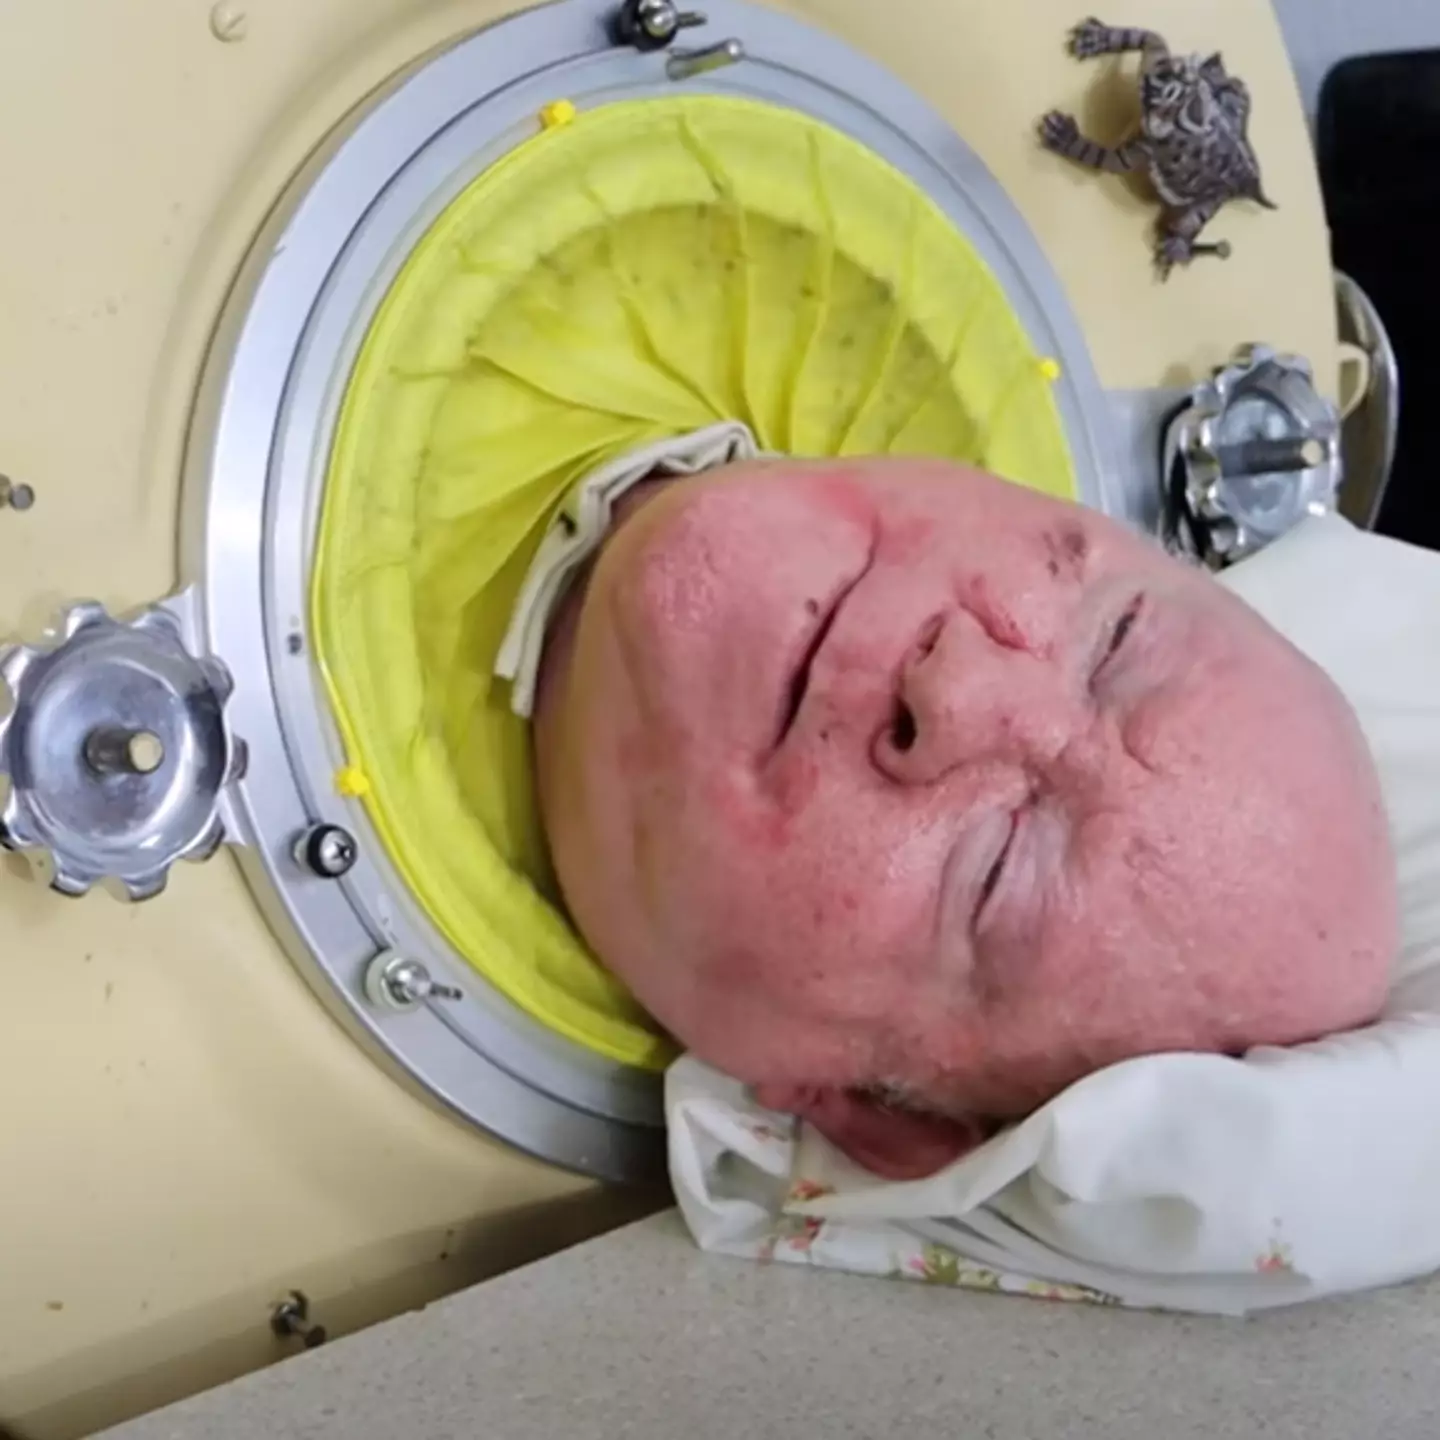 Man who’s survived inside iron lung for 72 years shares his incredible story on TikTok